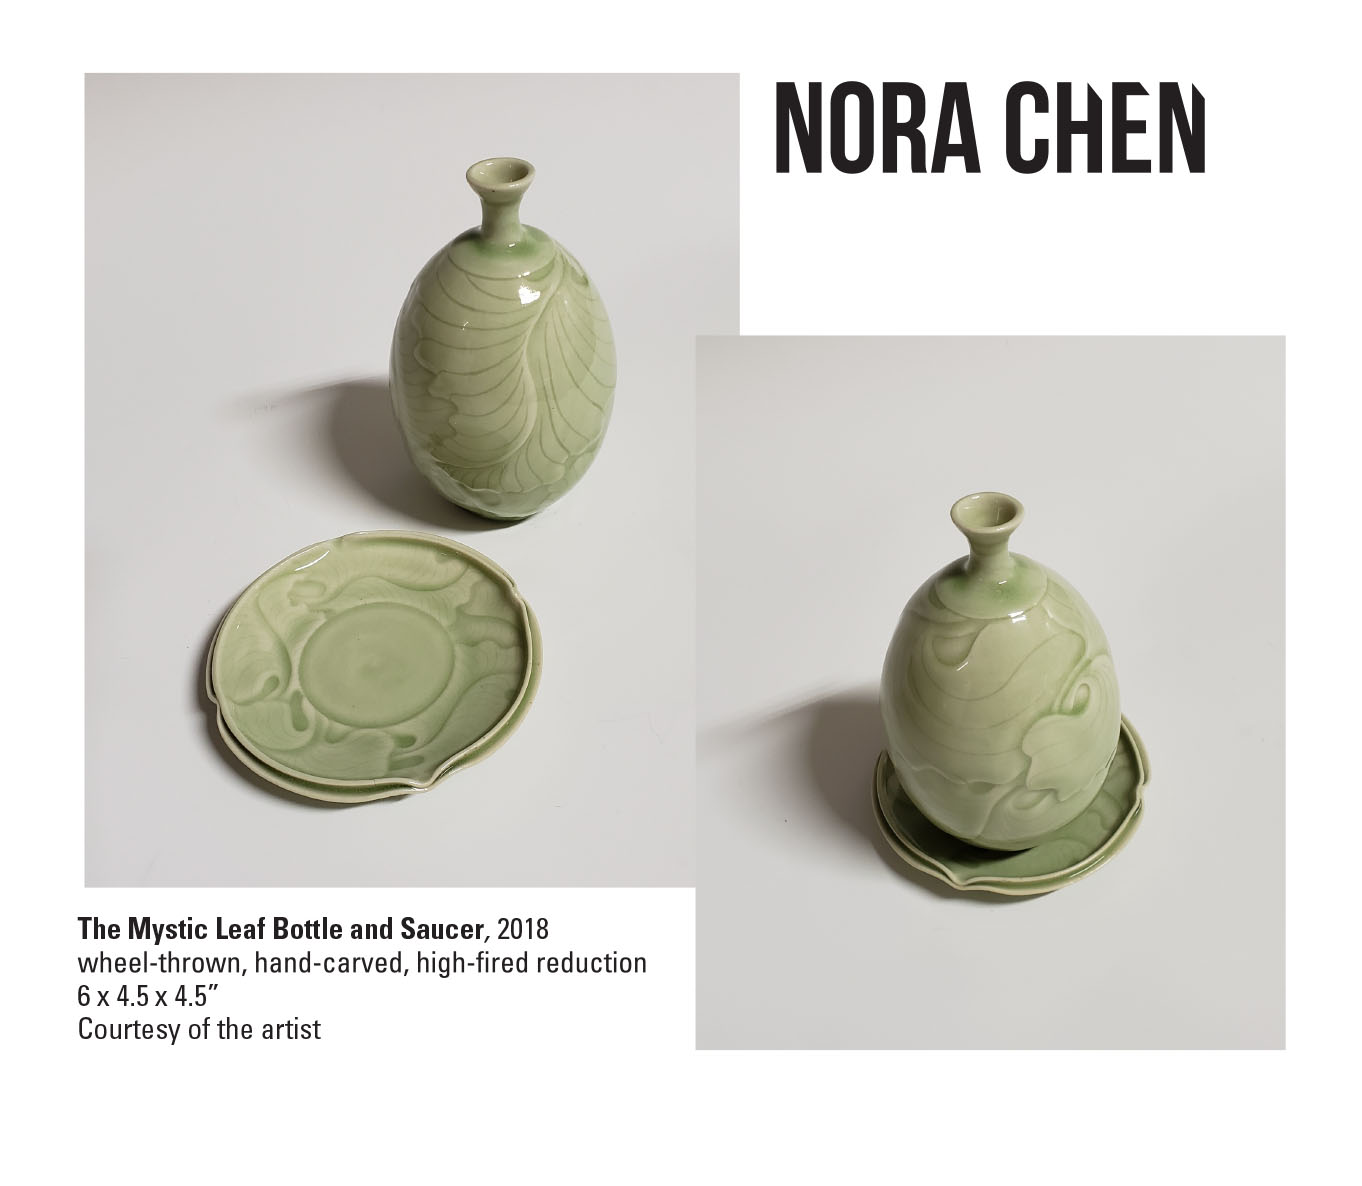 Nora Chen, The Mystic Leaf Bottle and Saucer, 2018. Wheel-thrown, hand-carved, high-fired reduction 6 x 4.5 x 4.5” Courtesy of the artist. A round spherical bottle on top of a saucer. Objects have a light green color and a leaf design placed around